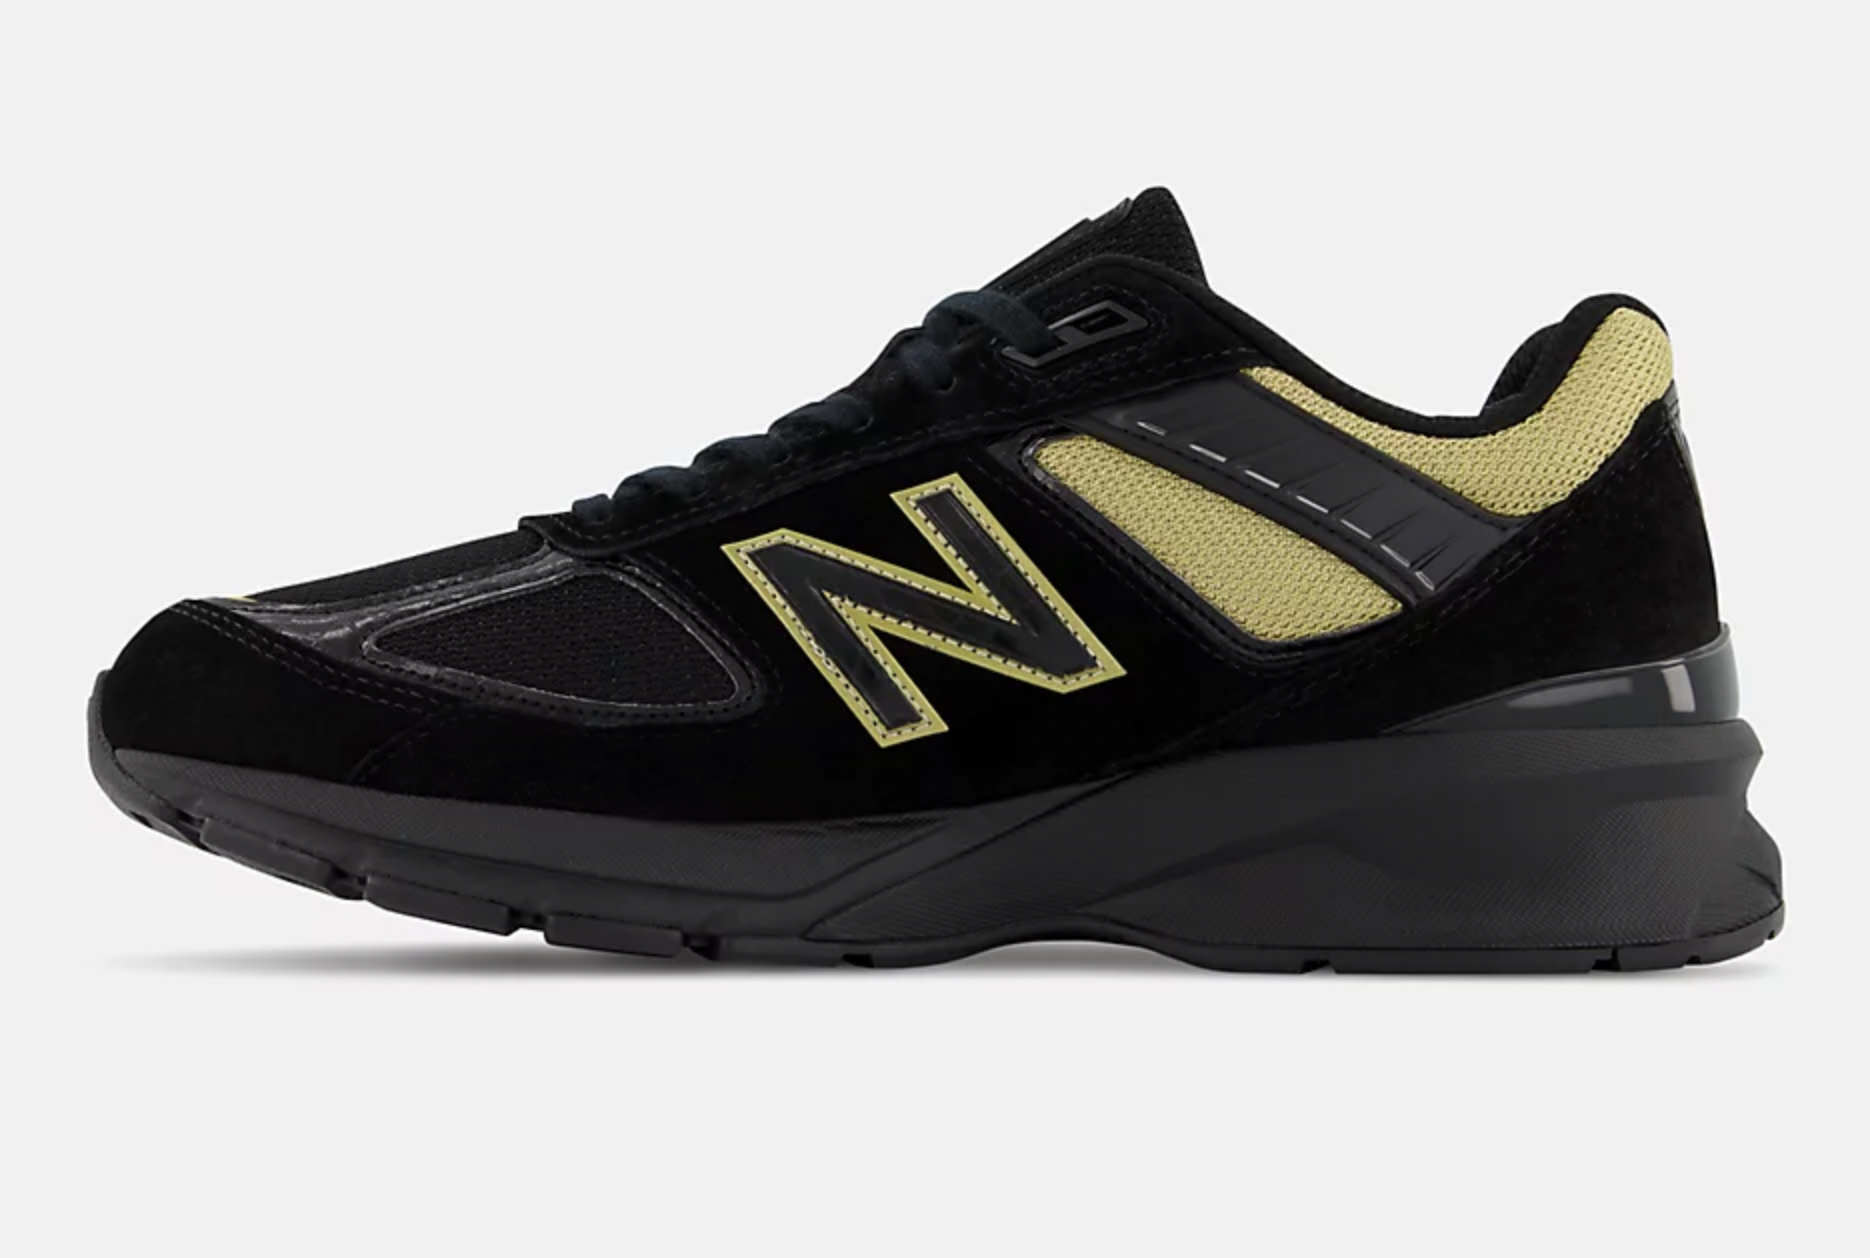 MENS 990BH5 MADE IN USA - BLACK WITH GOLD